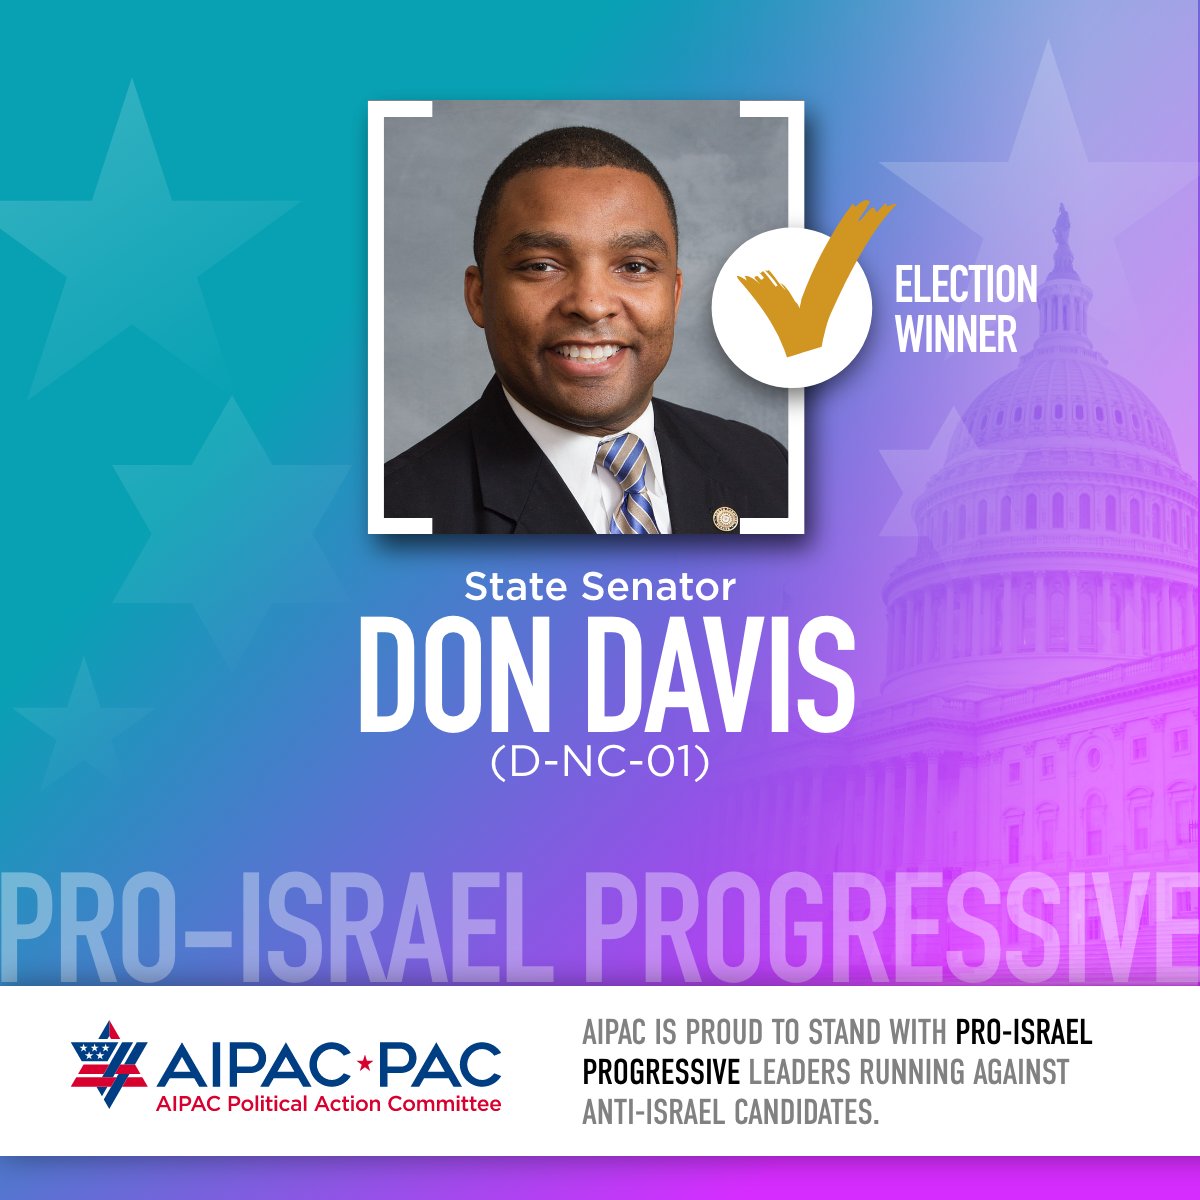 AIPAC, and our 1.6 million grassroots members, proudly exercise our civic and democratic rights to participate in the political process. By helping elect pro-Israel progressive leaders - including pro-Israel progressive women of color - we advance America's interests and values.